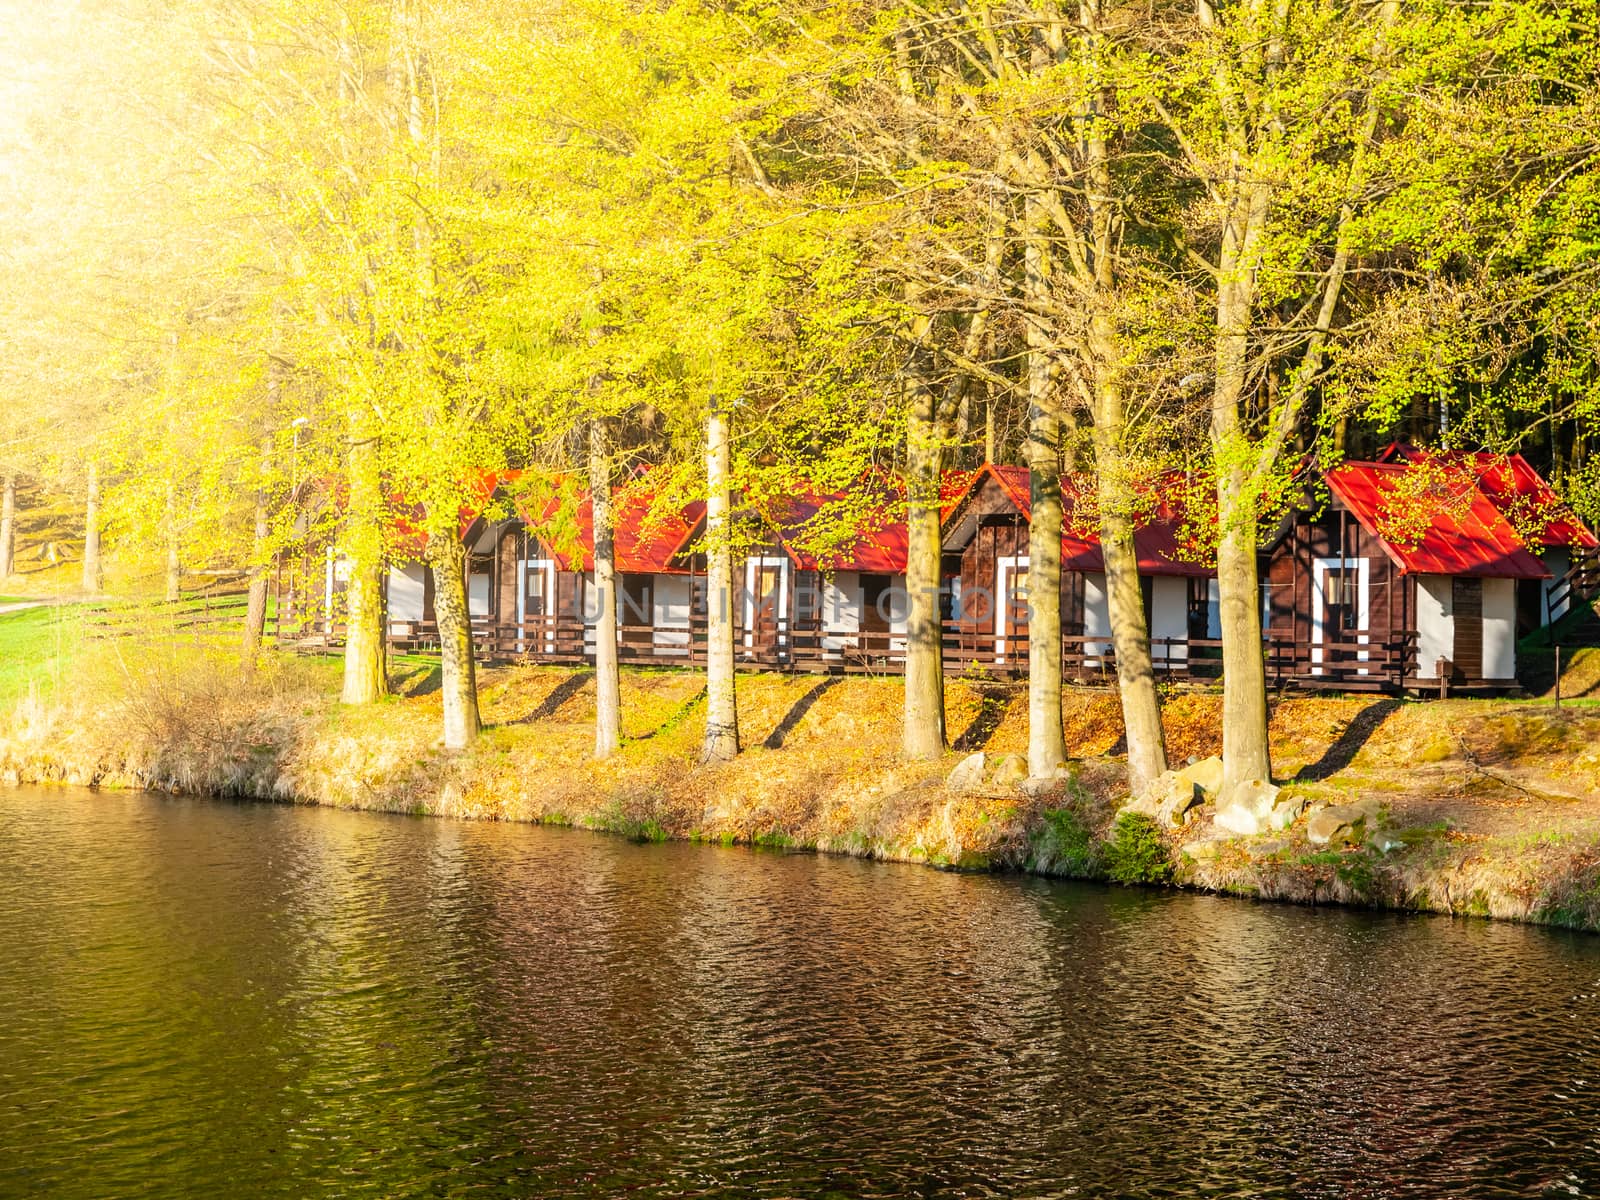 Small wooden forest cottages at the water.